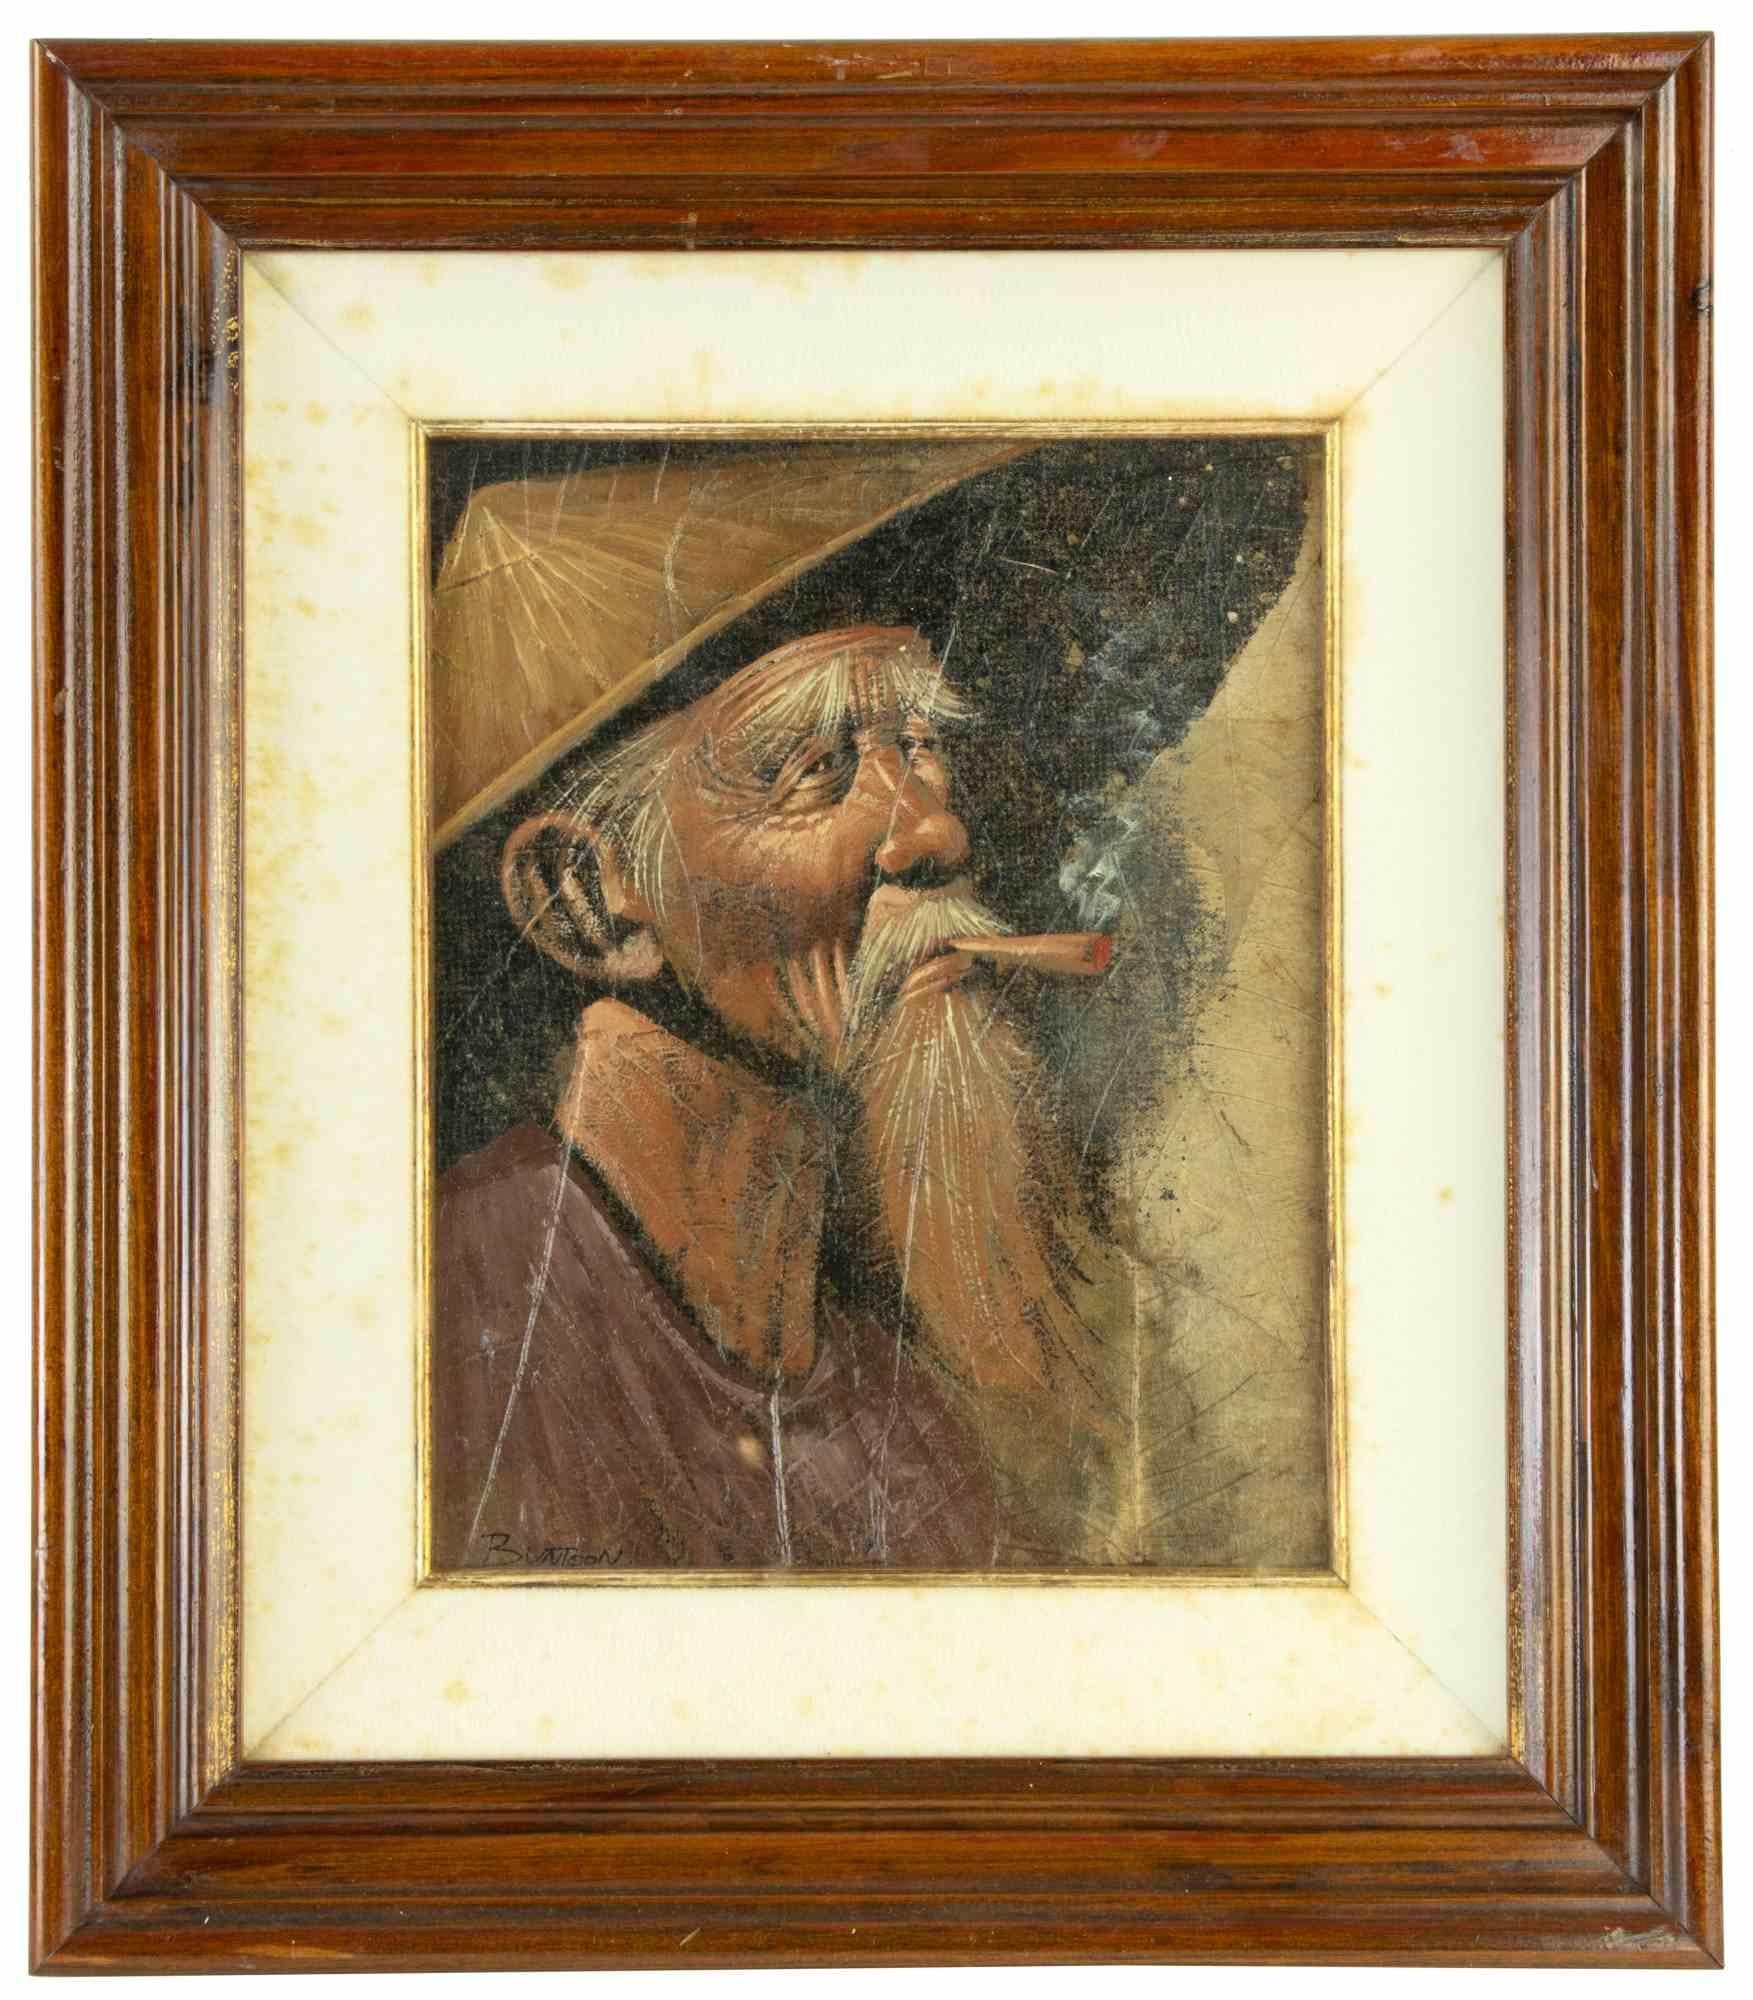 Portrait of Old Smoker is an artwork realized by Buntoon Bothers, 1970s. 

Oil on Tobacco Leaf. 

24 x 19 cm ; 40 x 35 with frame.

Good conditions! 